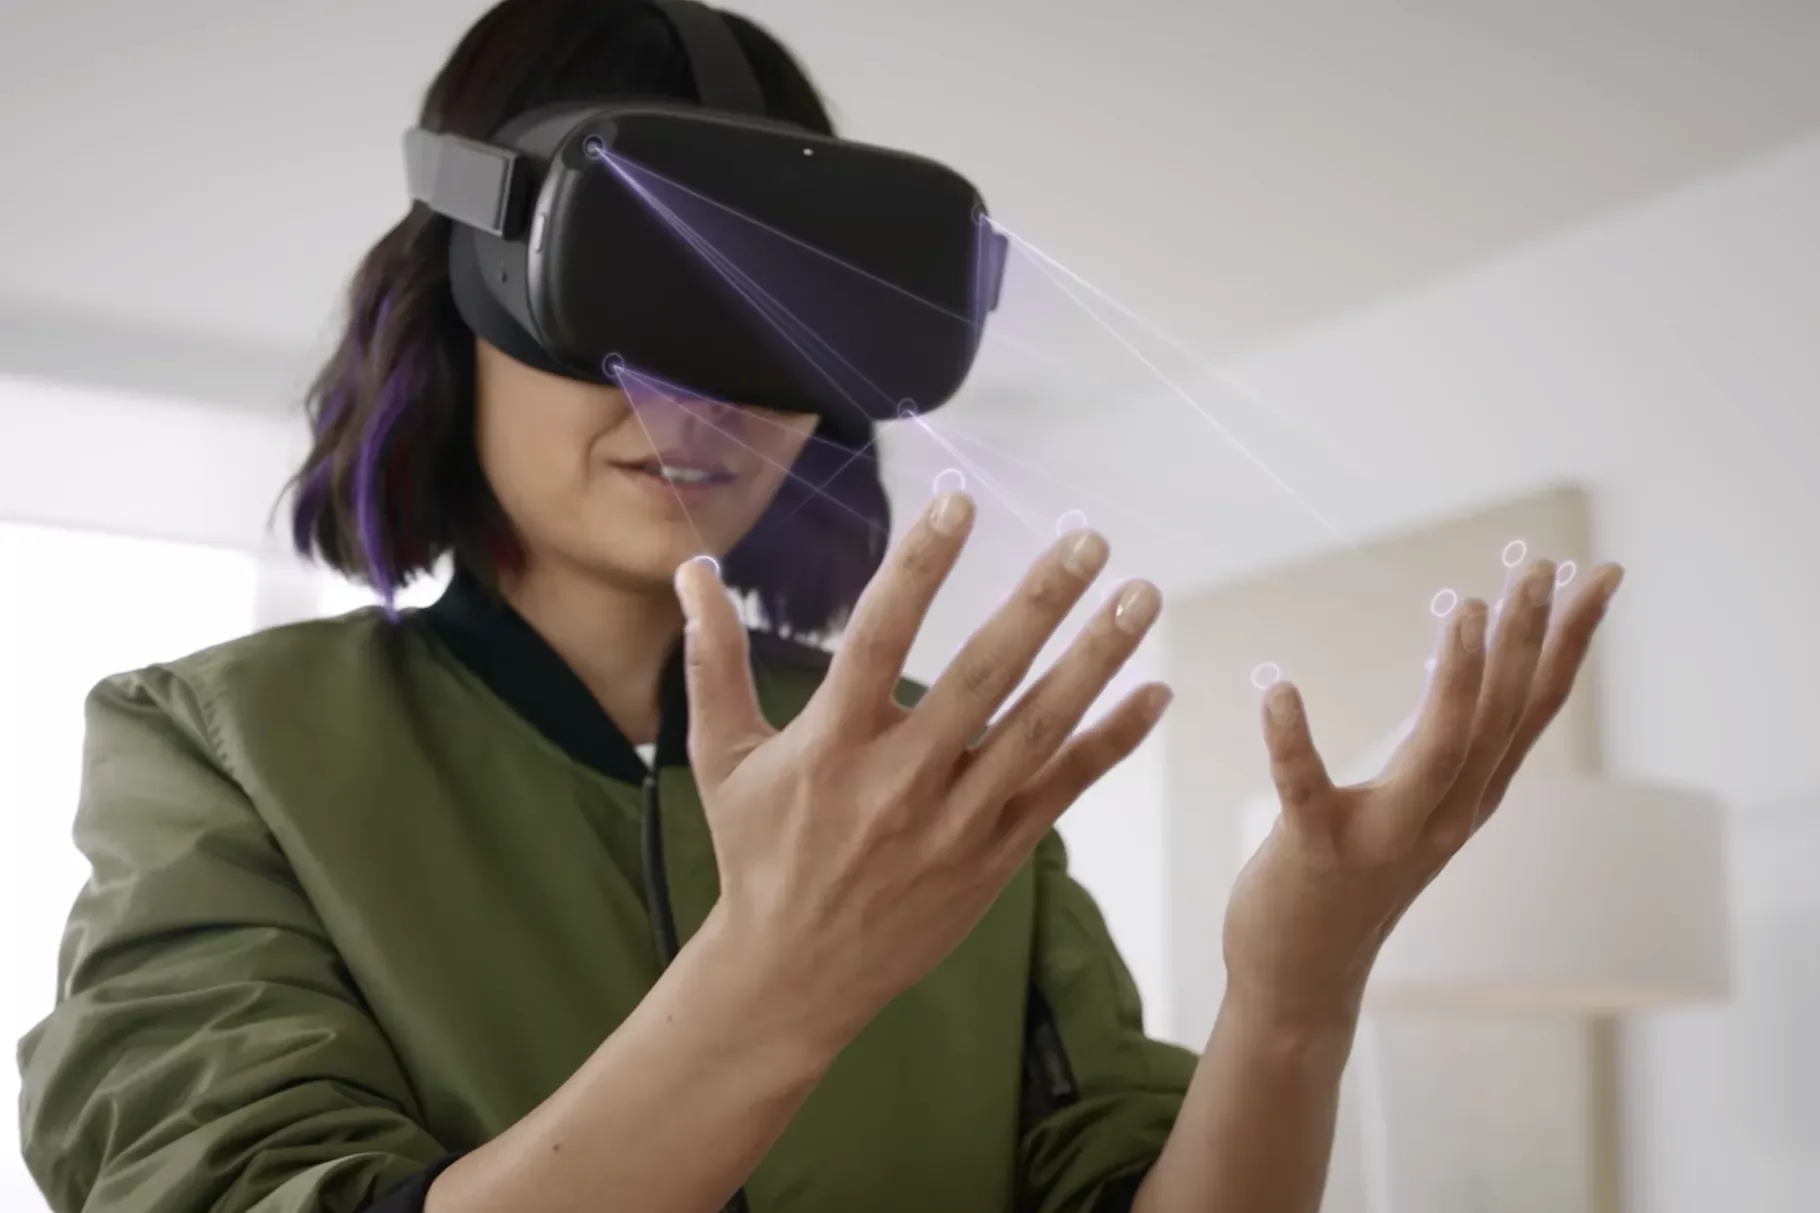 oculus quest. Integration within meta as a strategic decision